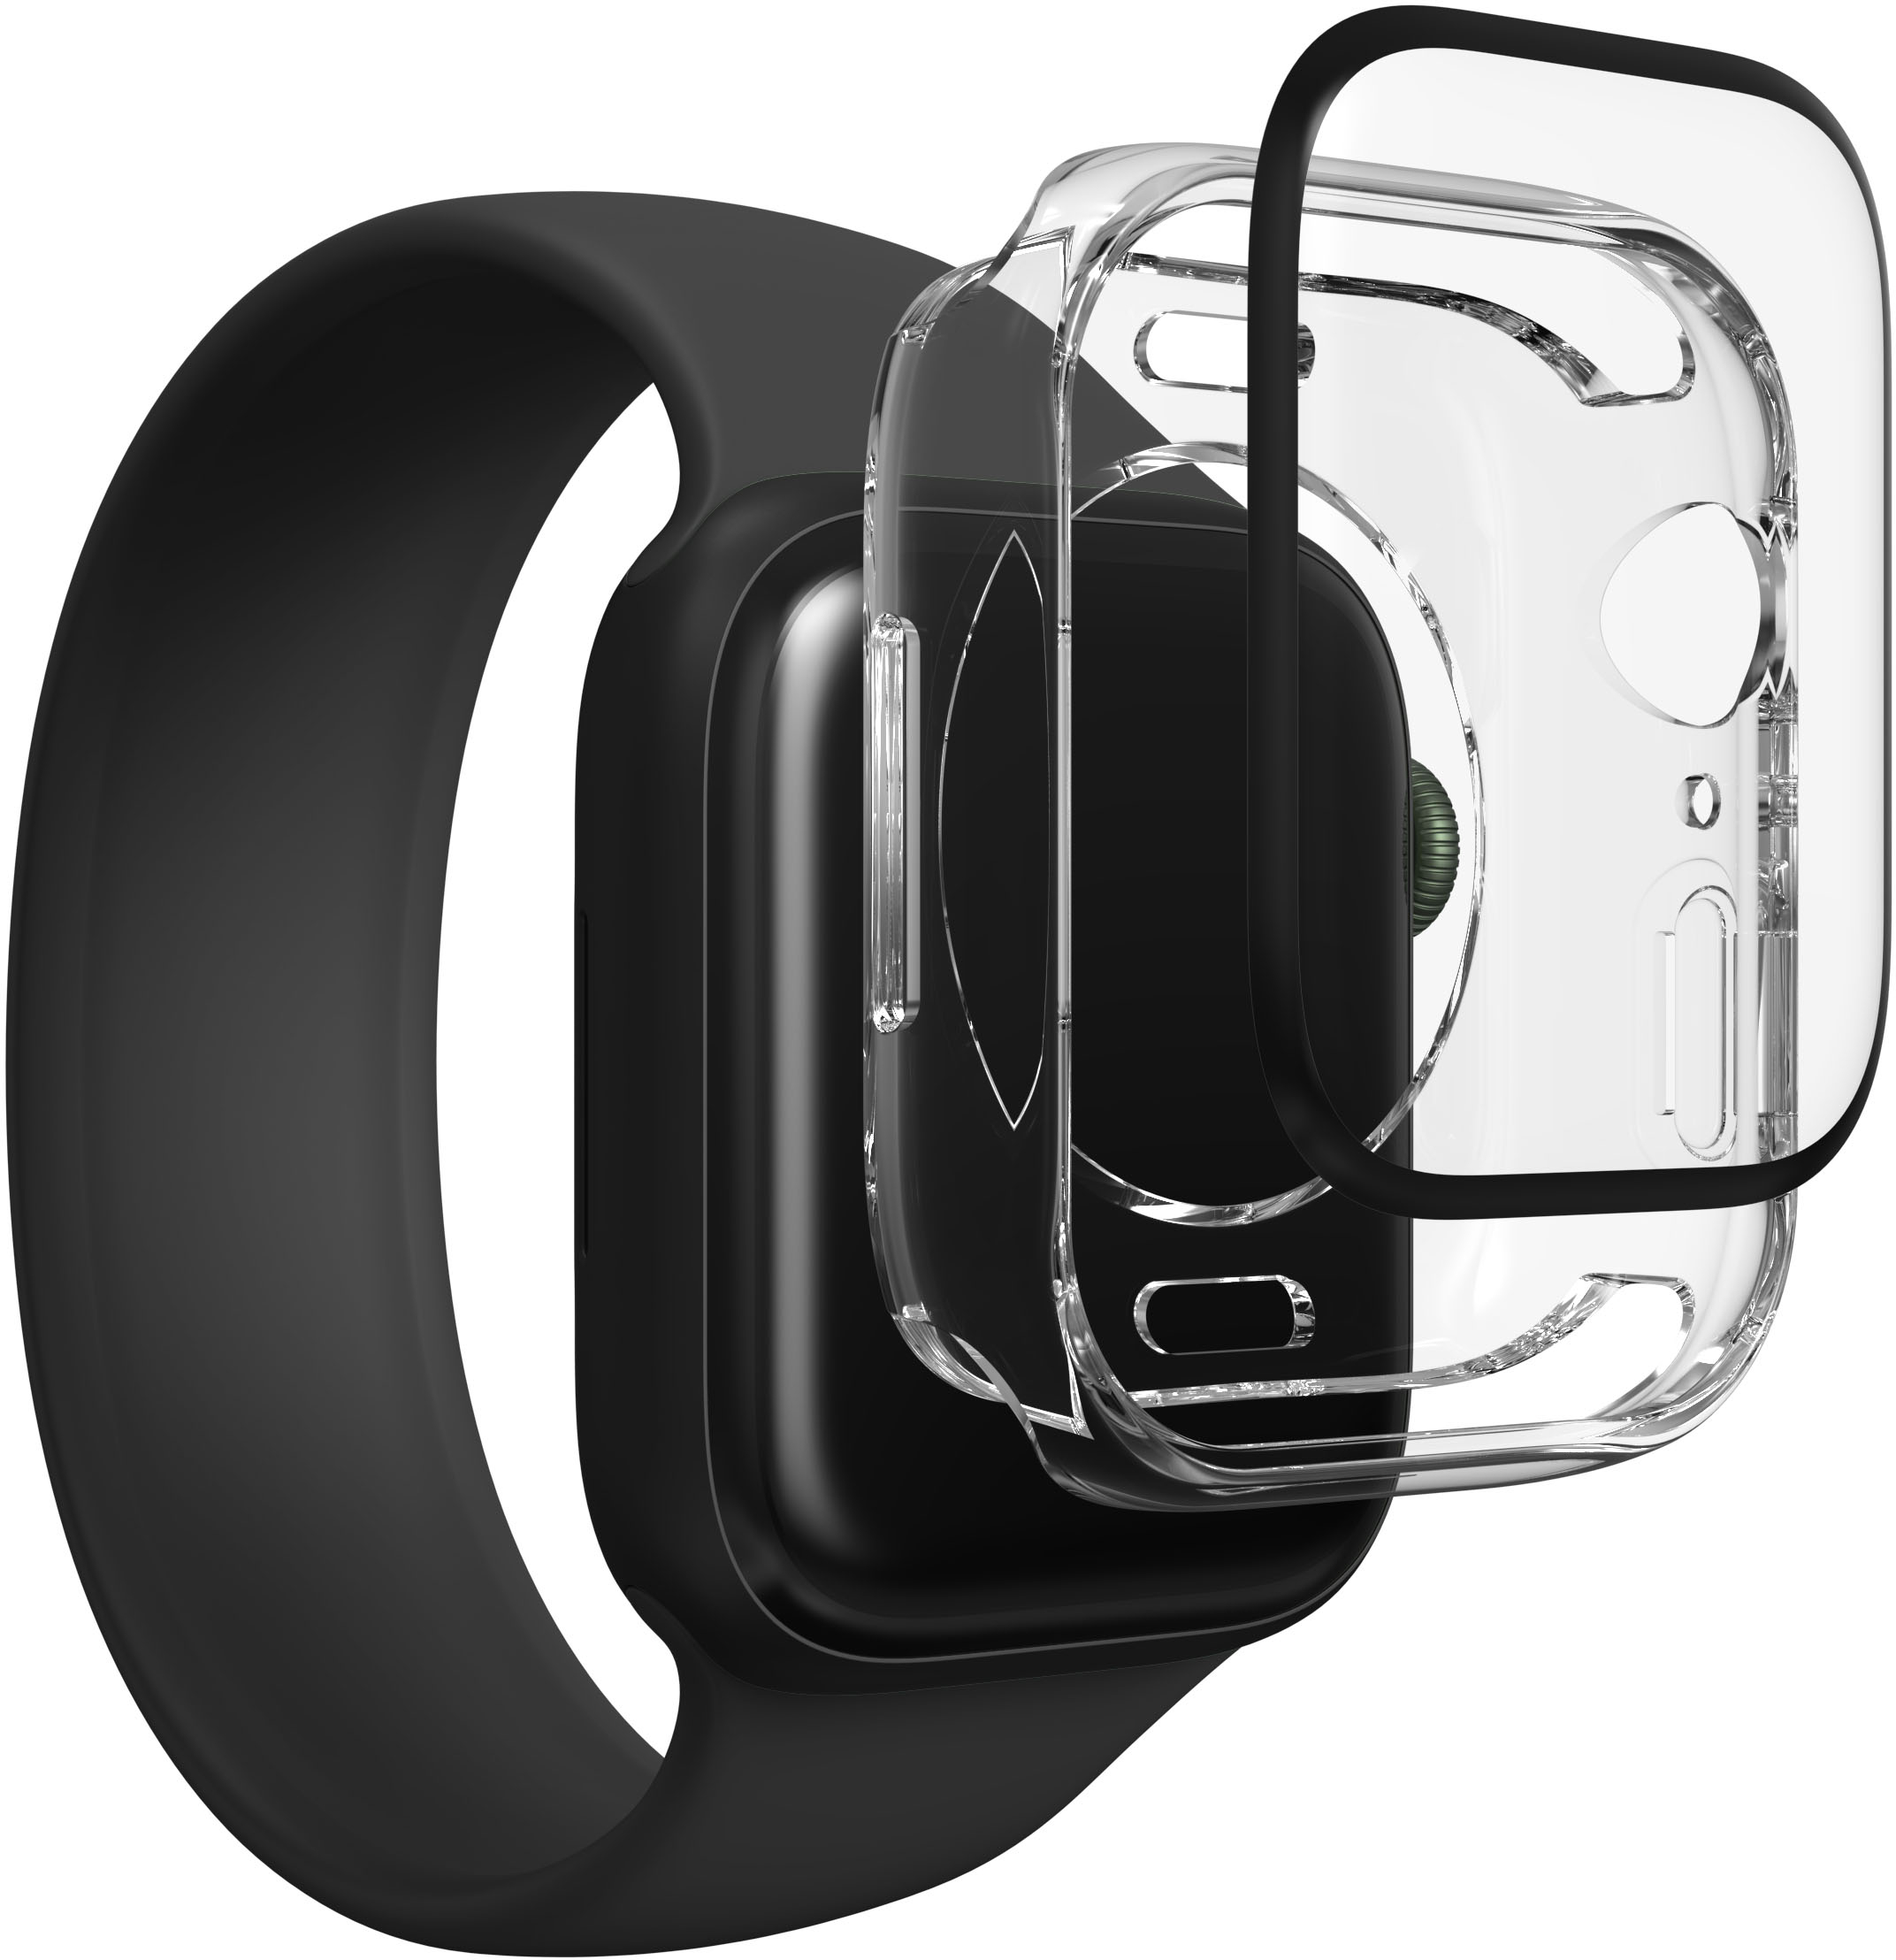 ZAGG - InvisibleShield GlassFusion+ 360 Flexible Hybrid Screen Protector + Bumper for Apple Watch Series 7 and 8 45mm - Clear